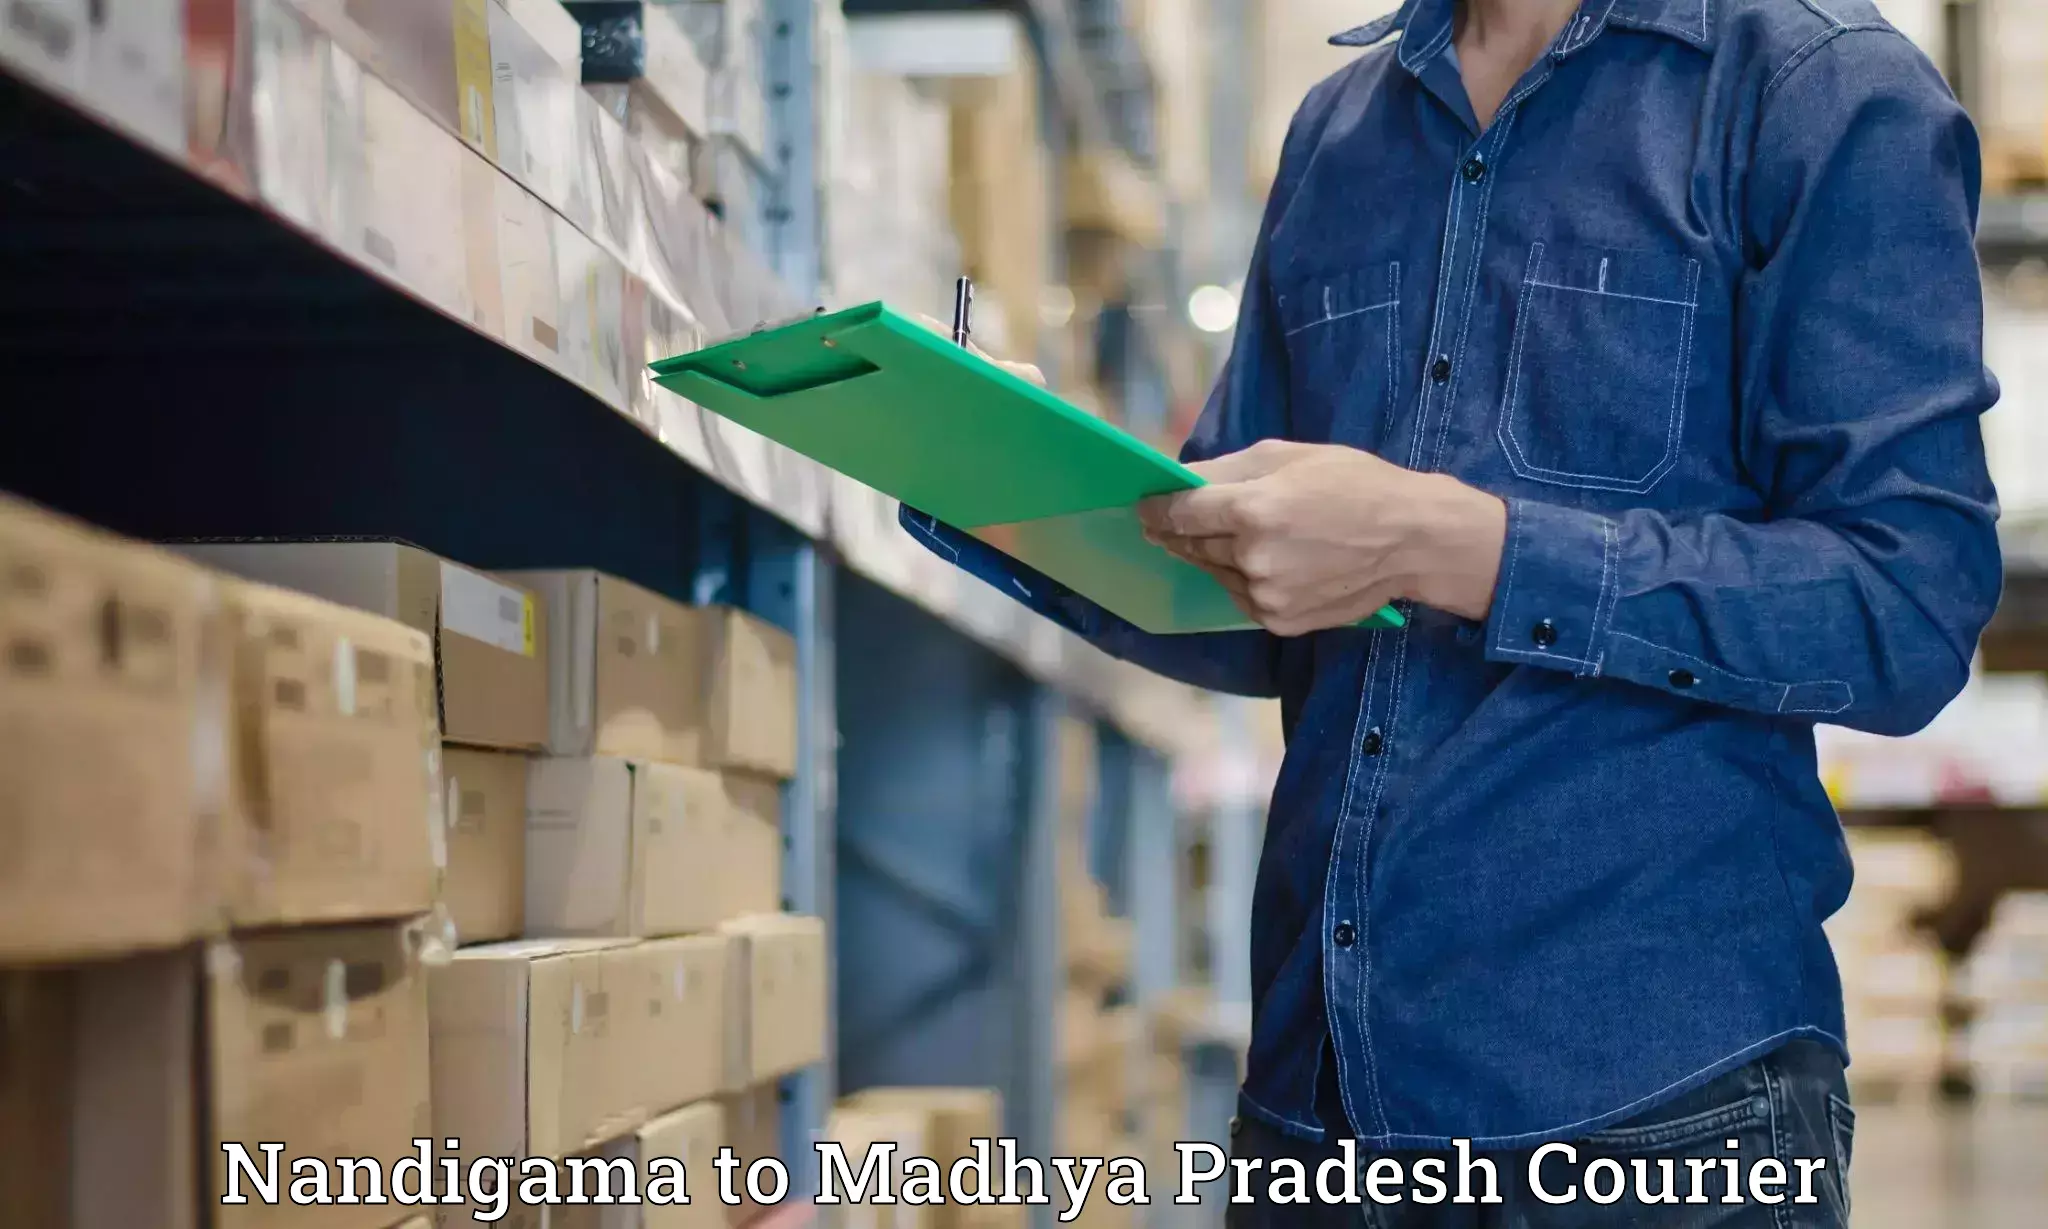 Reliable shipping partners Nandigama to Sidhi